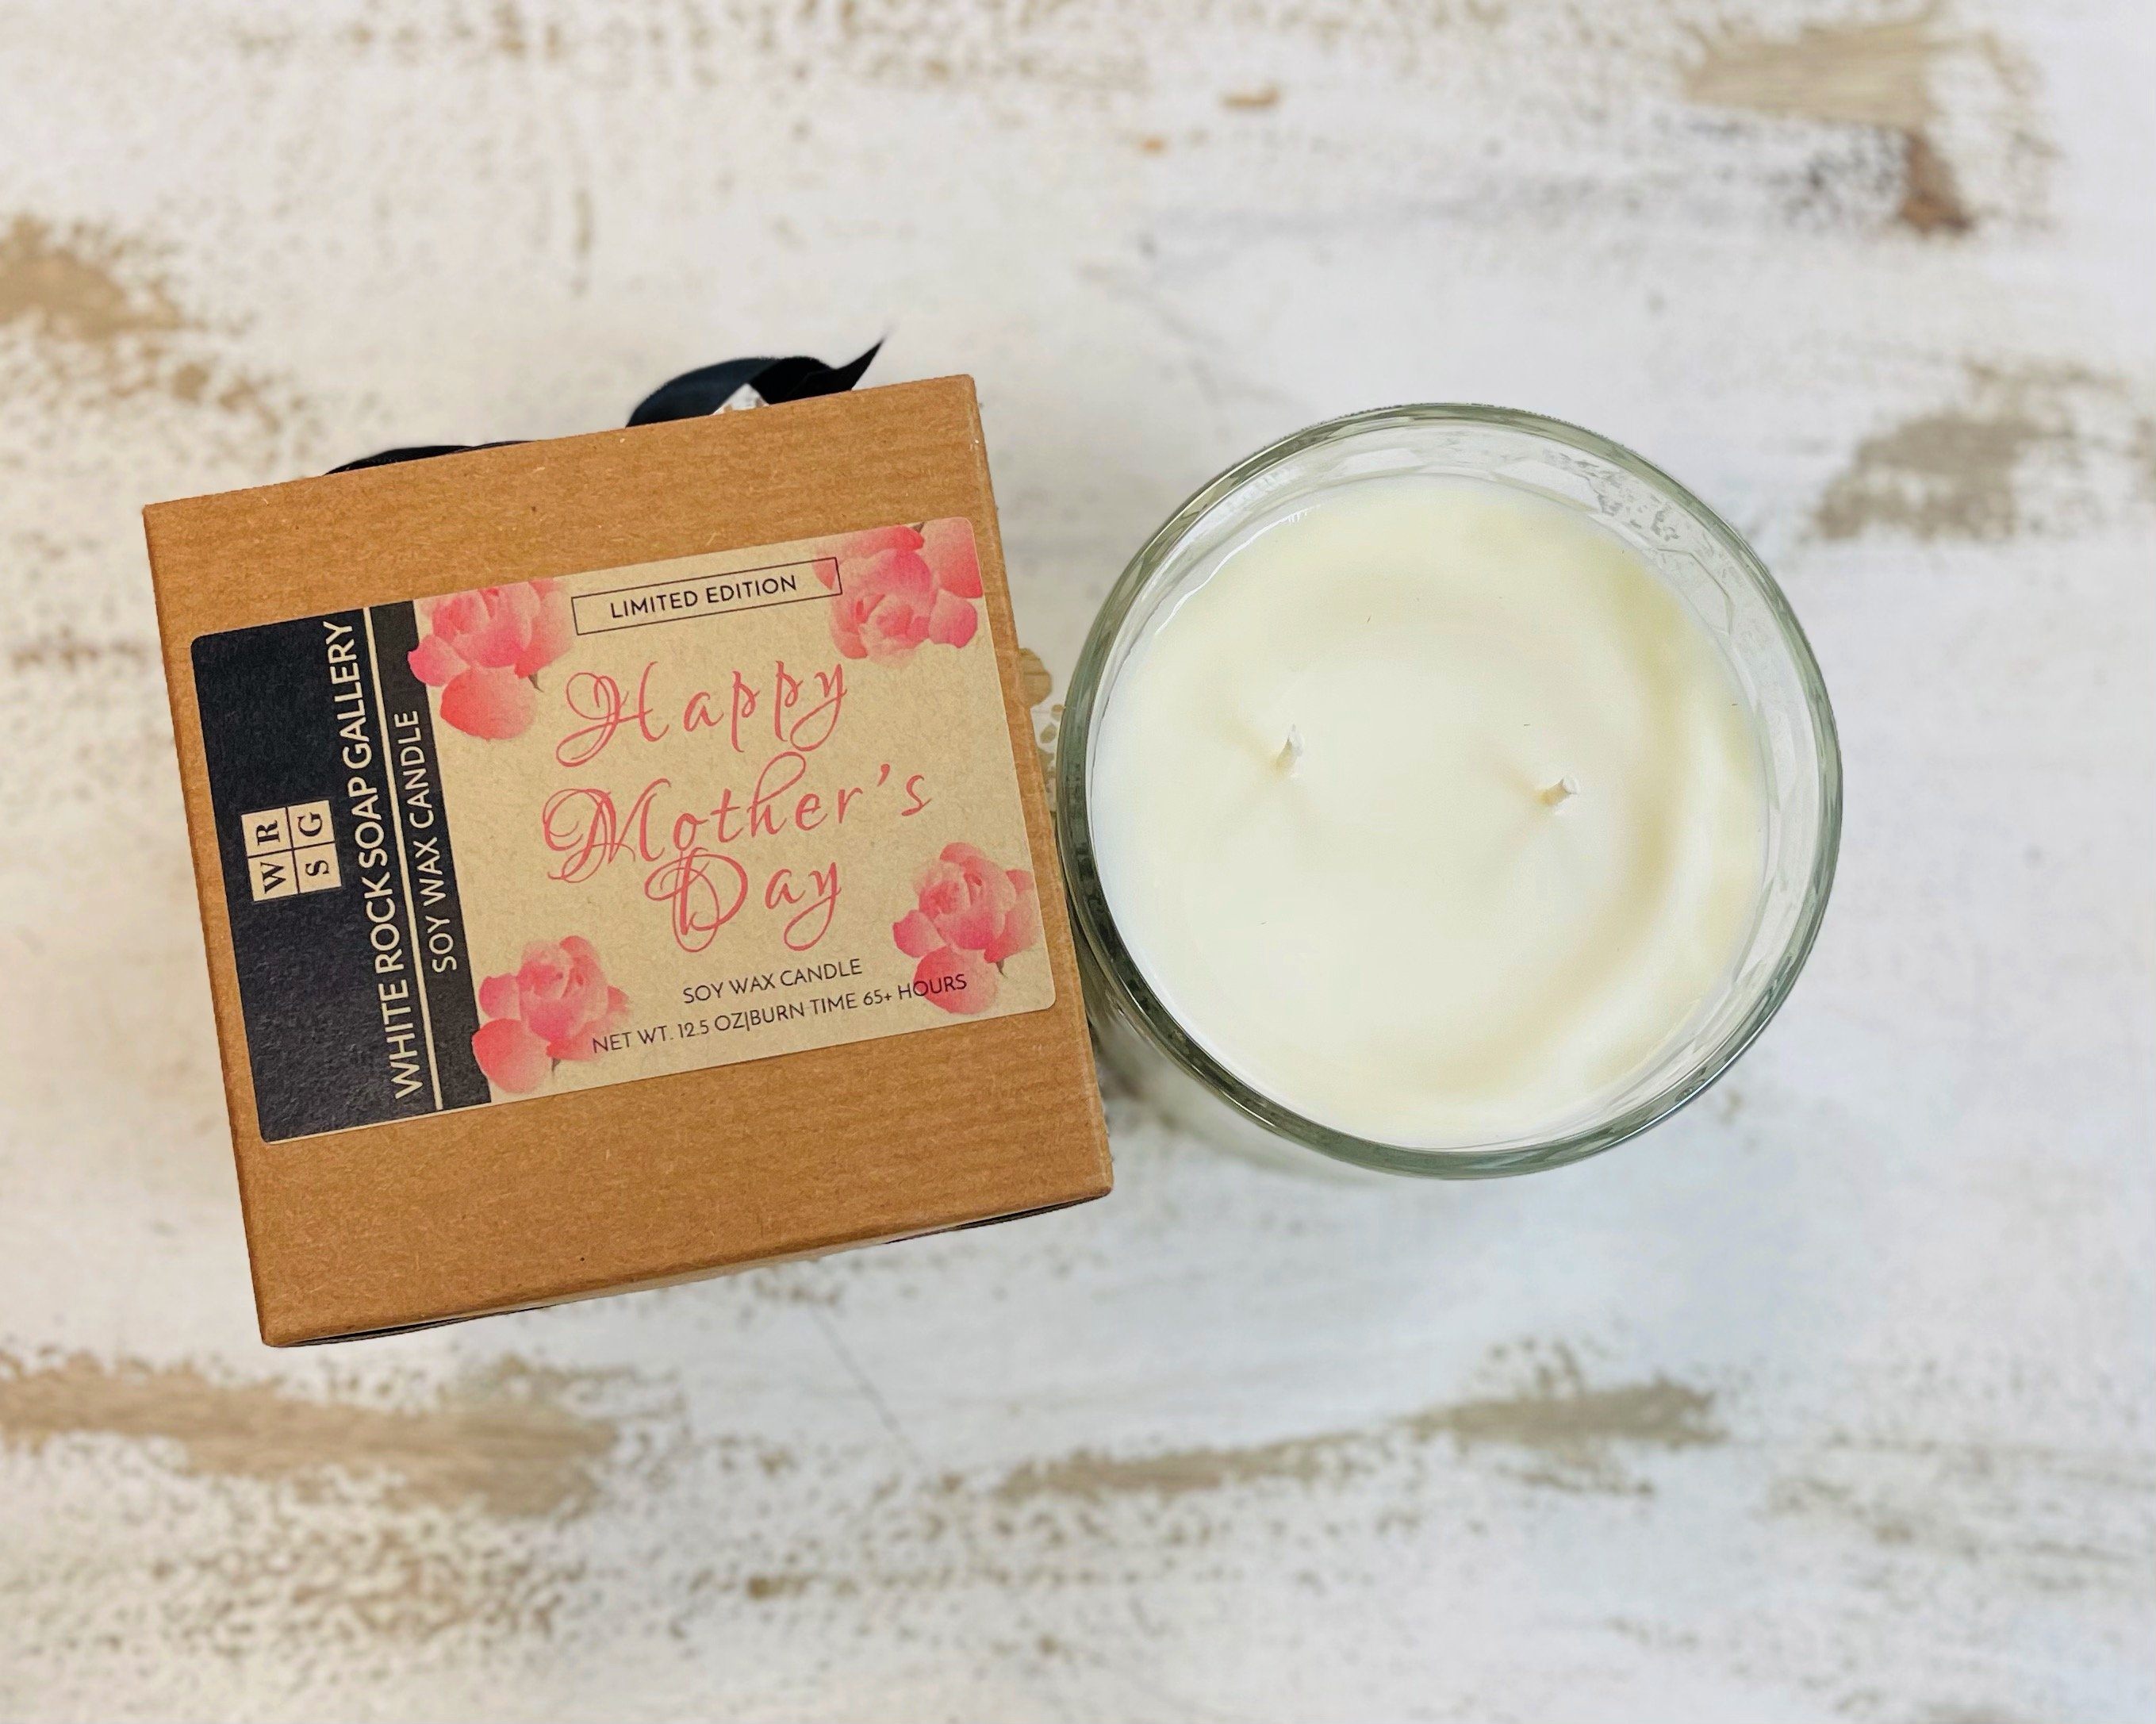 Soy Wax Candle - Limited Edition Mother's Day